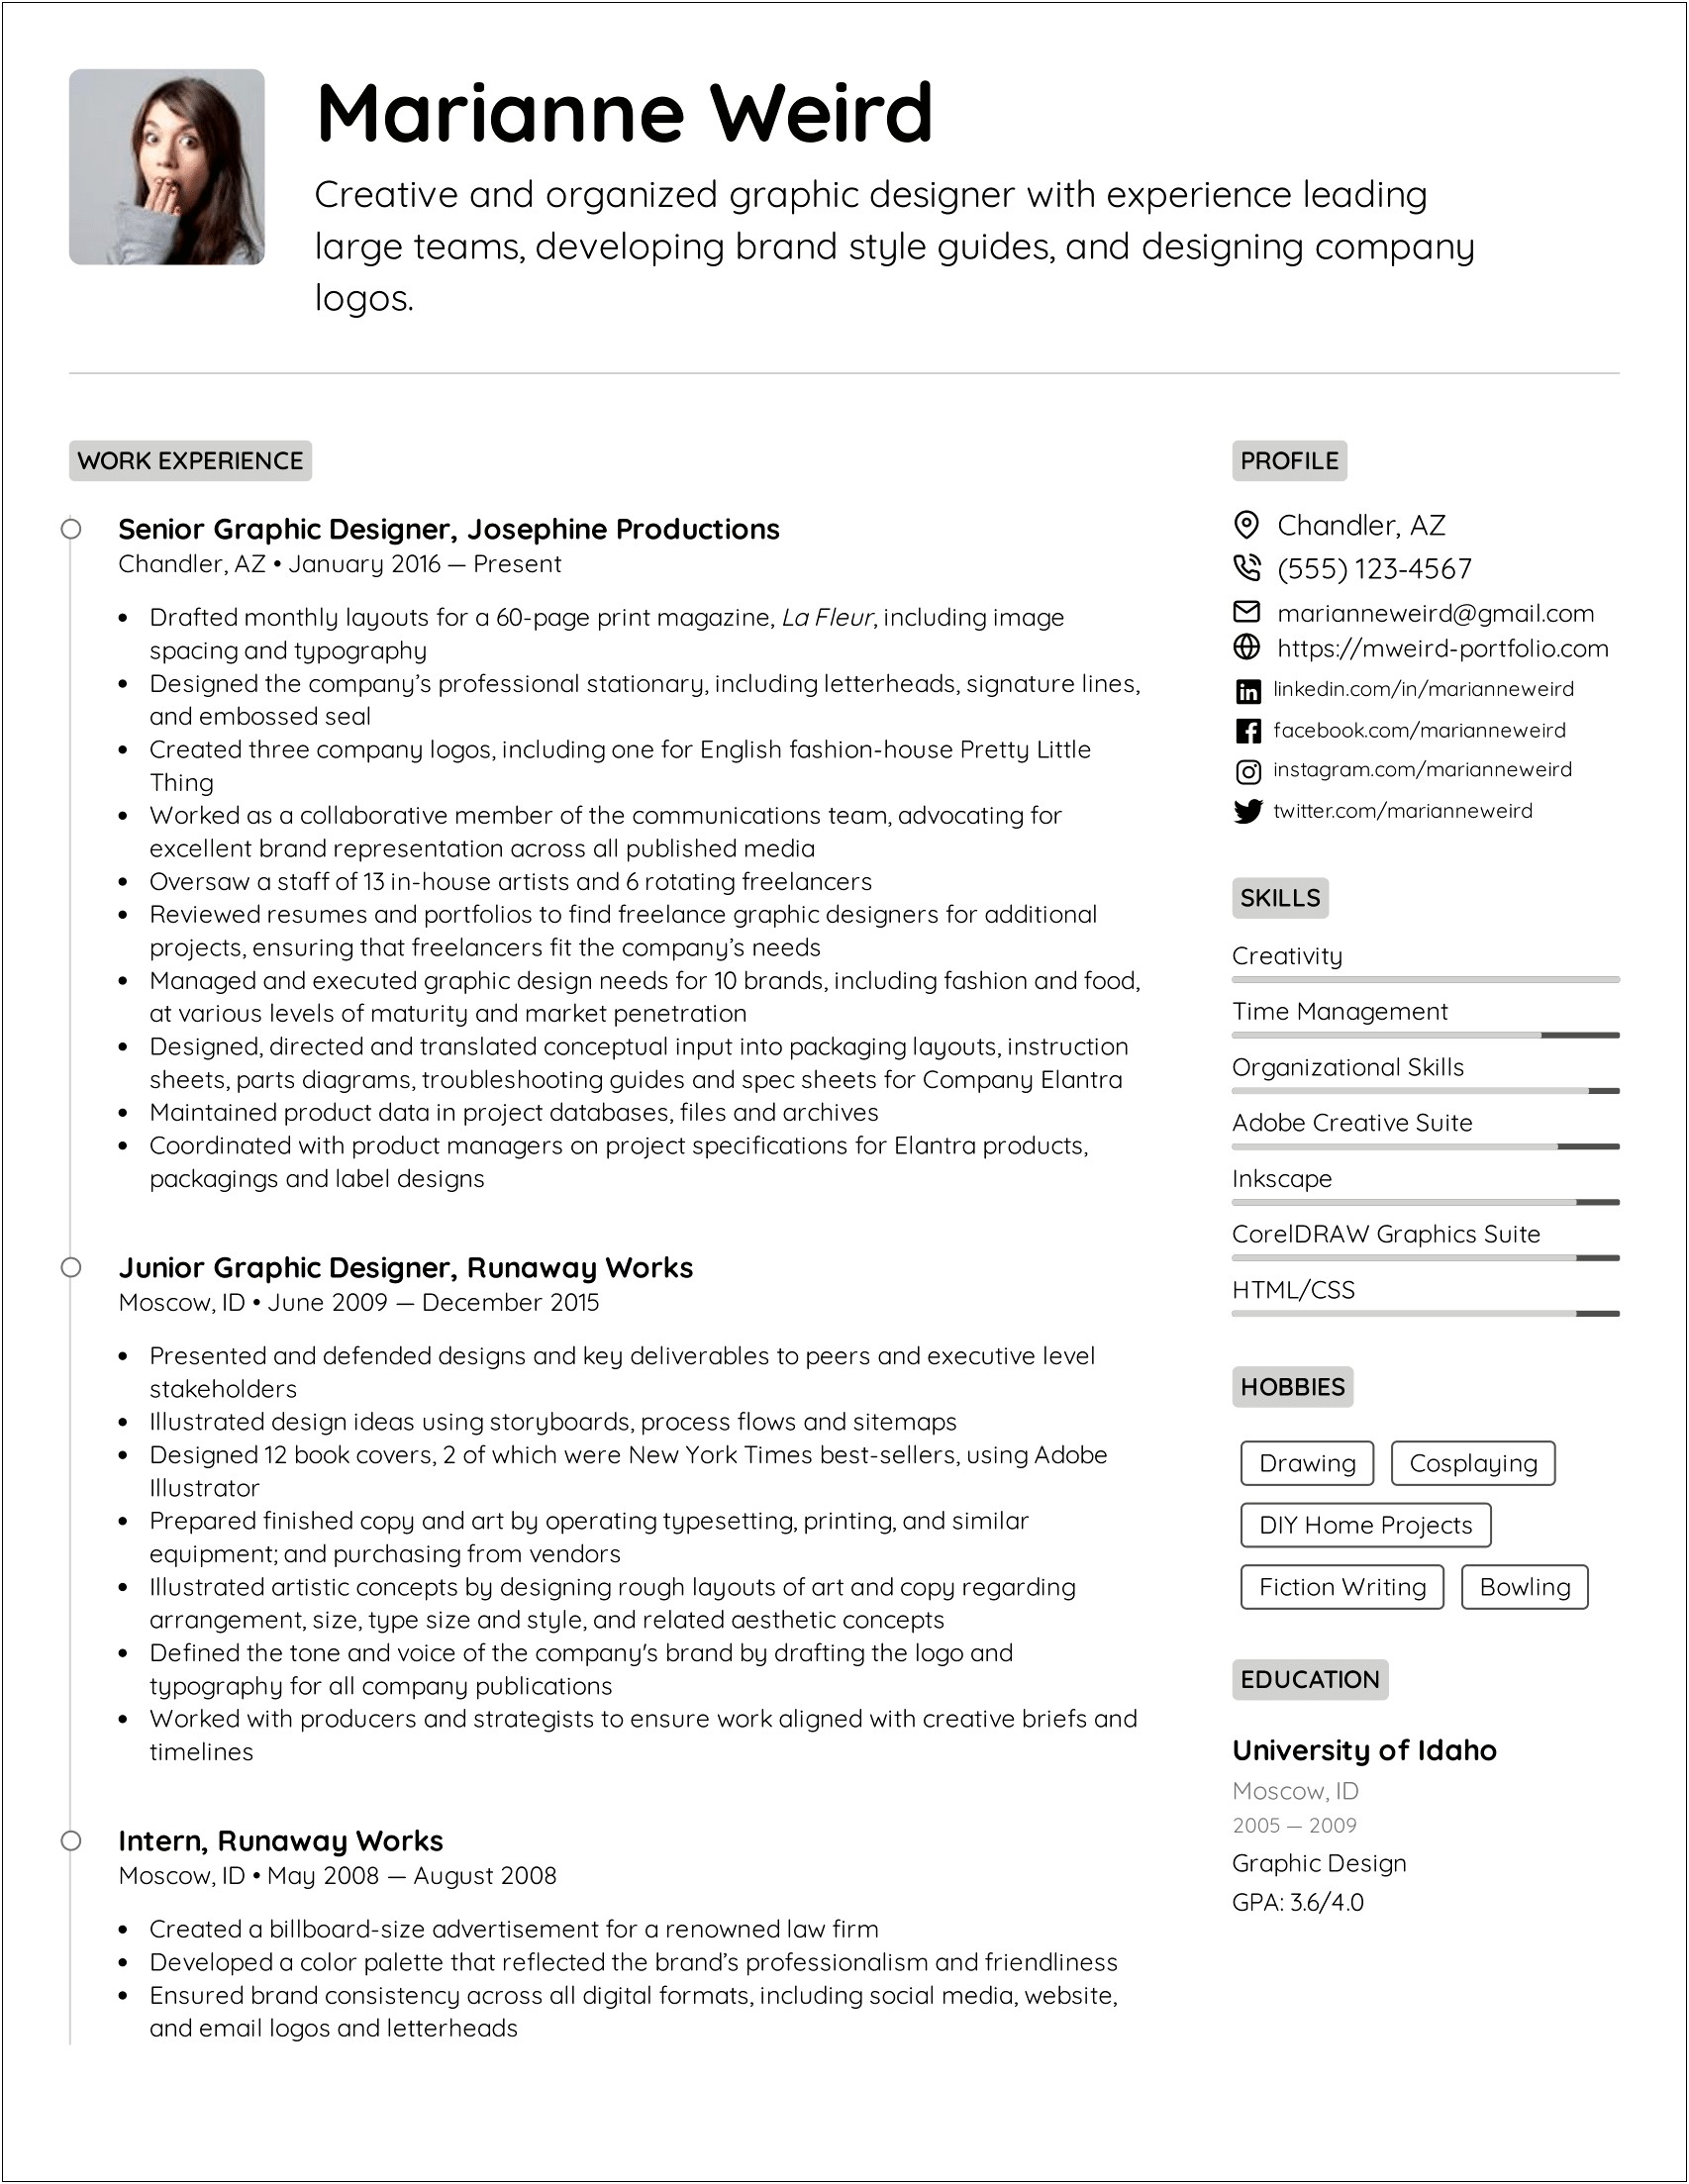 Administrative Assistant Resume It Skills Icloud And Onedrive